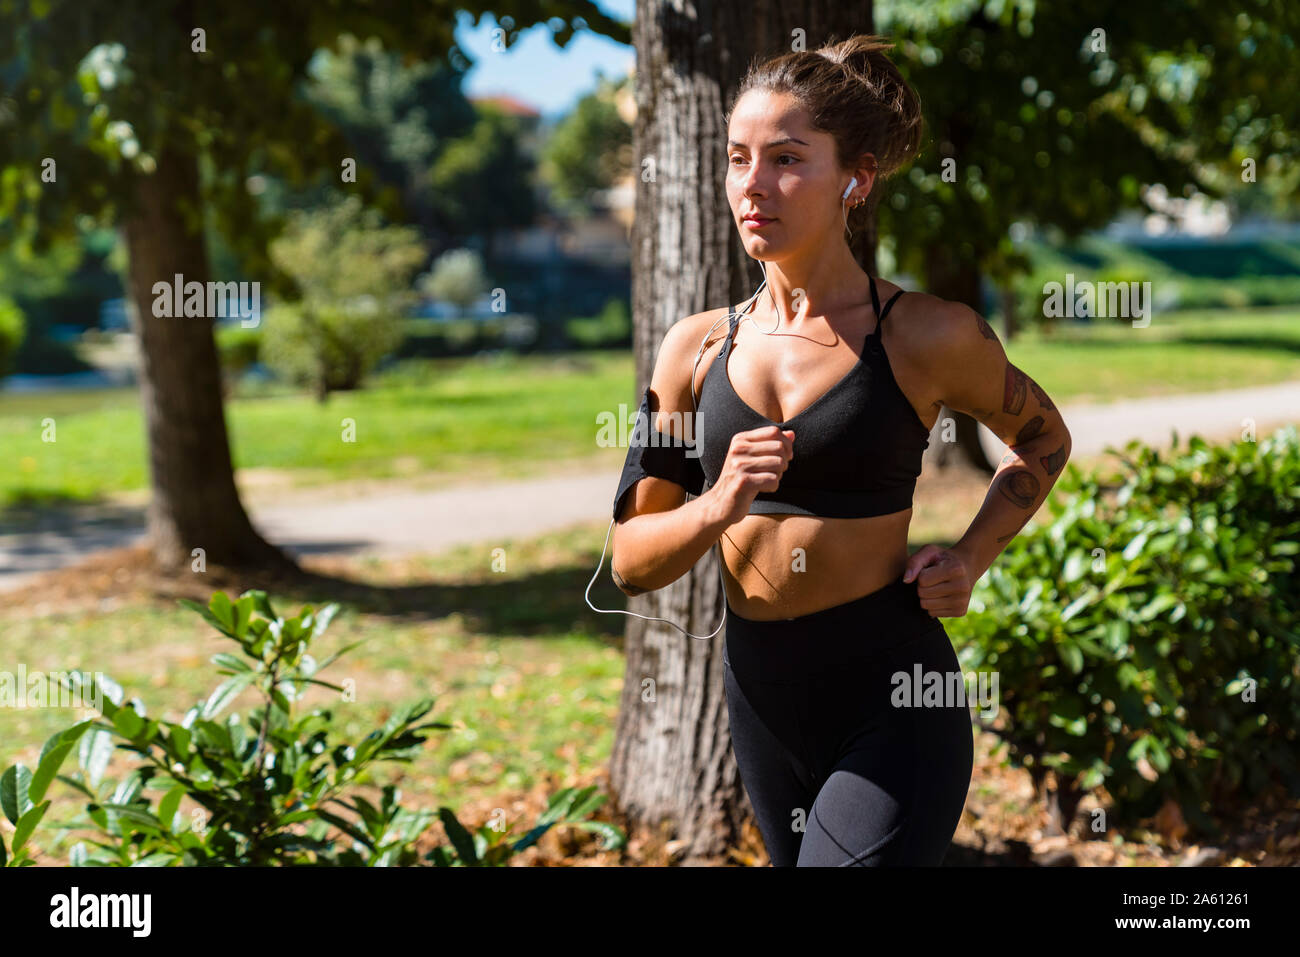 Young woman running in a park Stock Photo